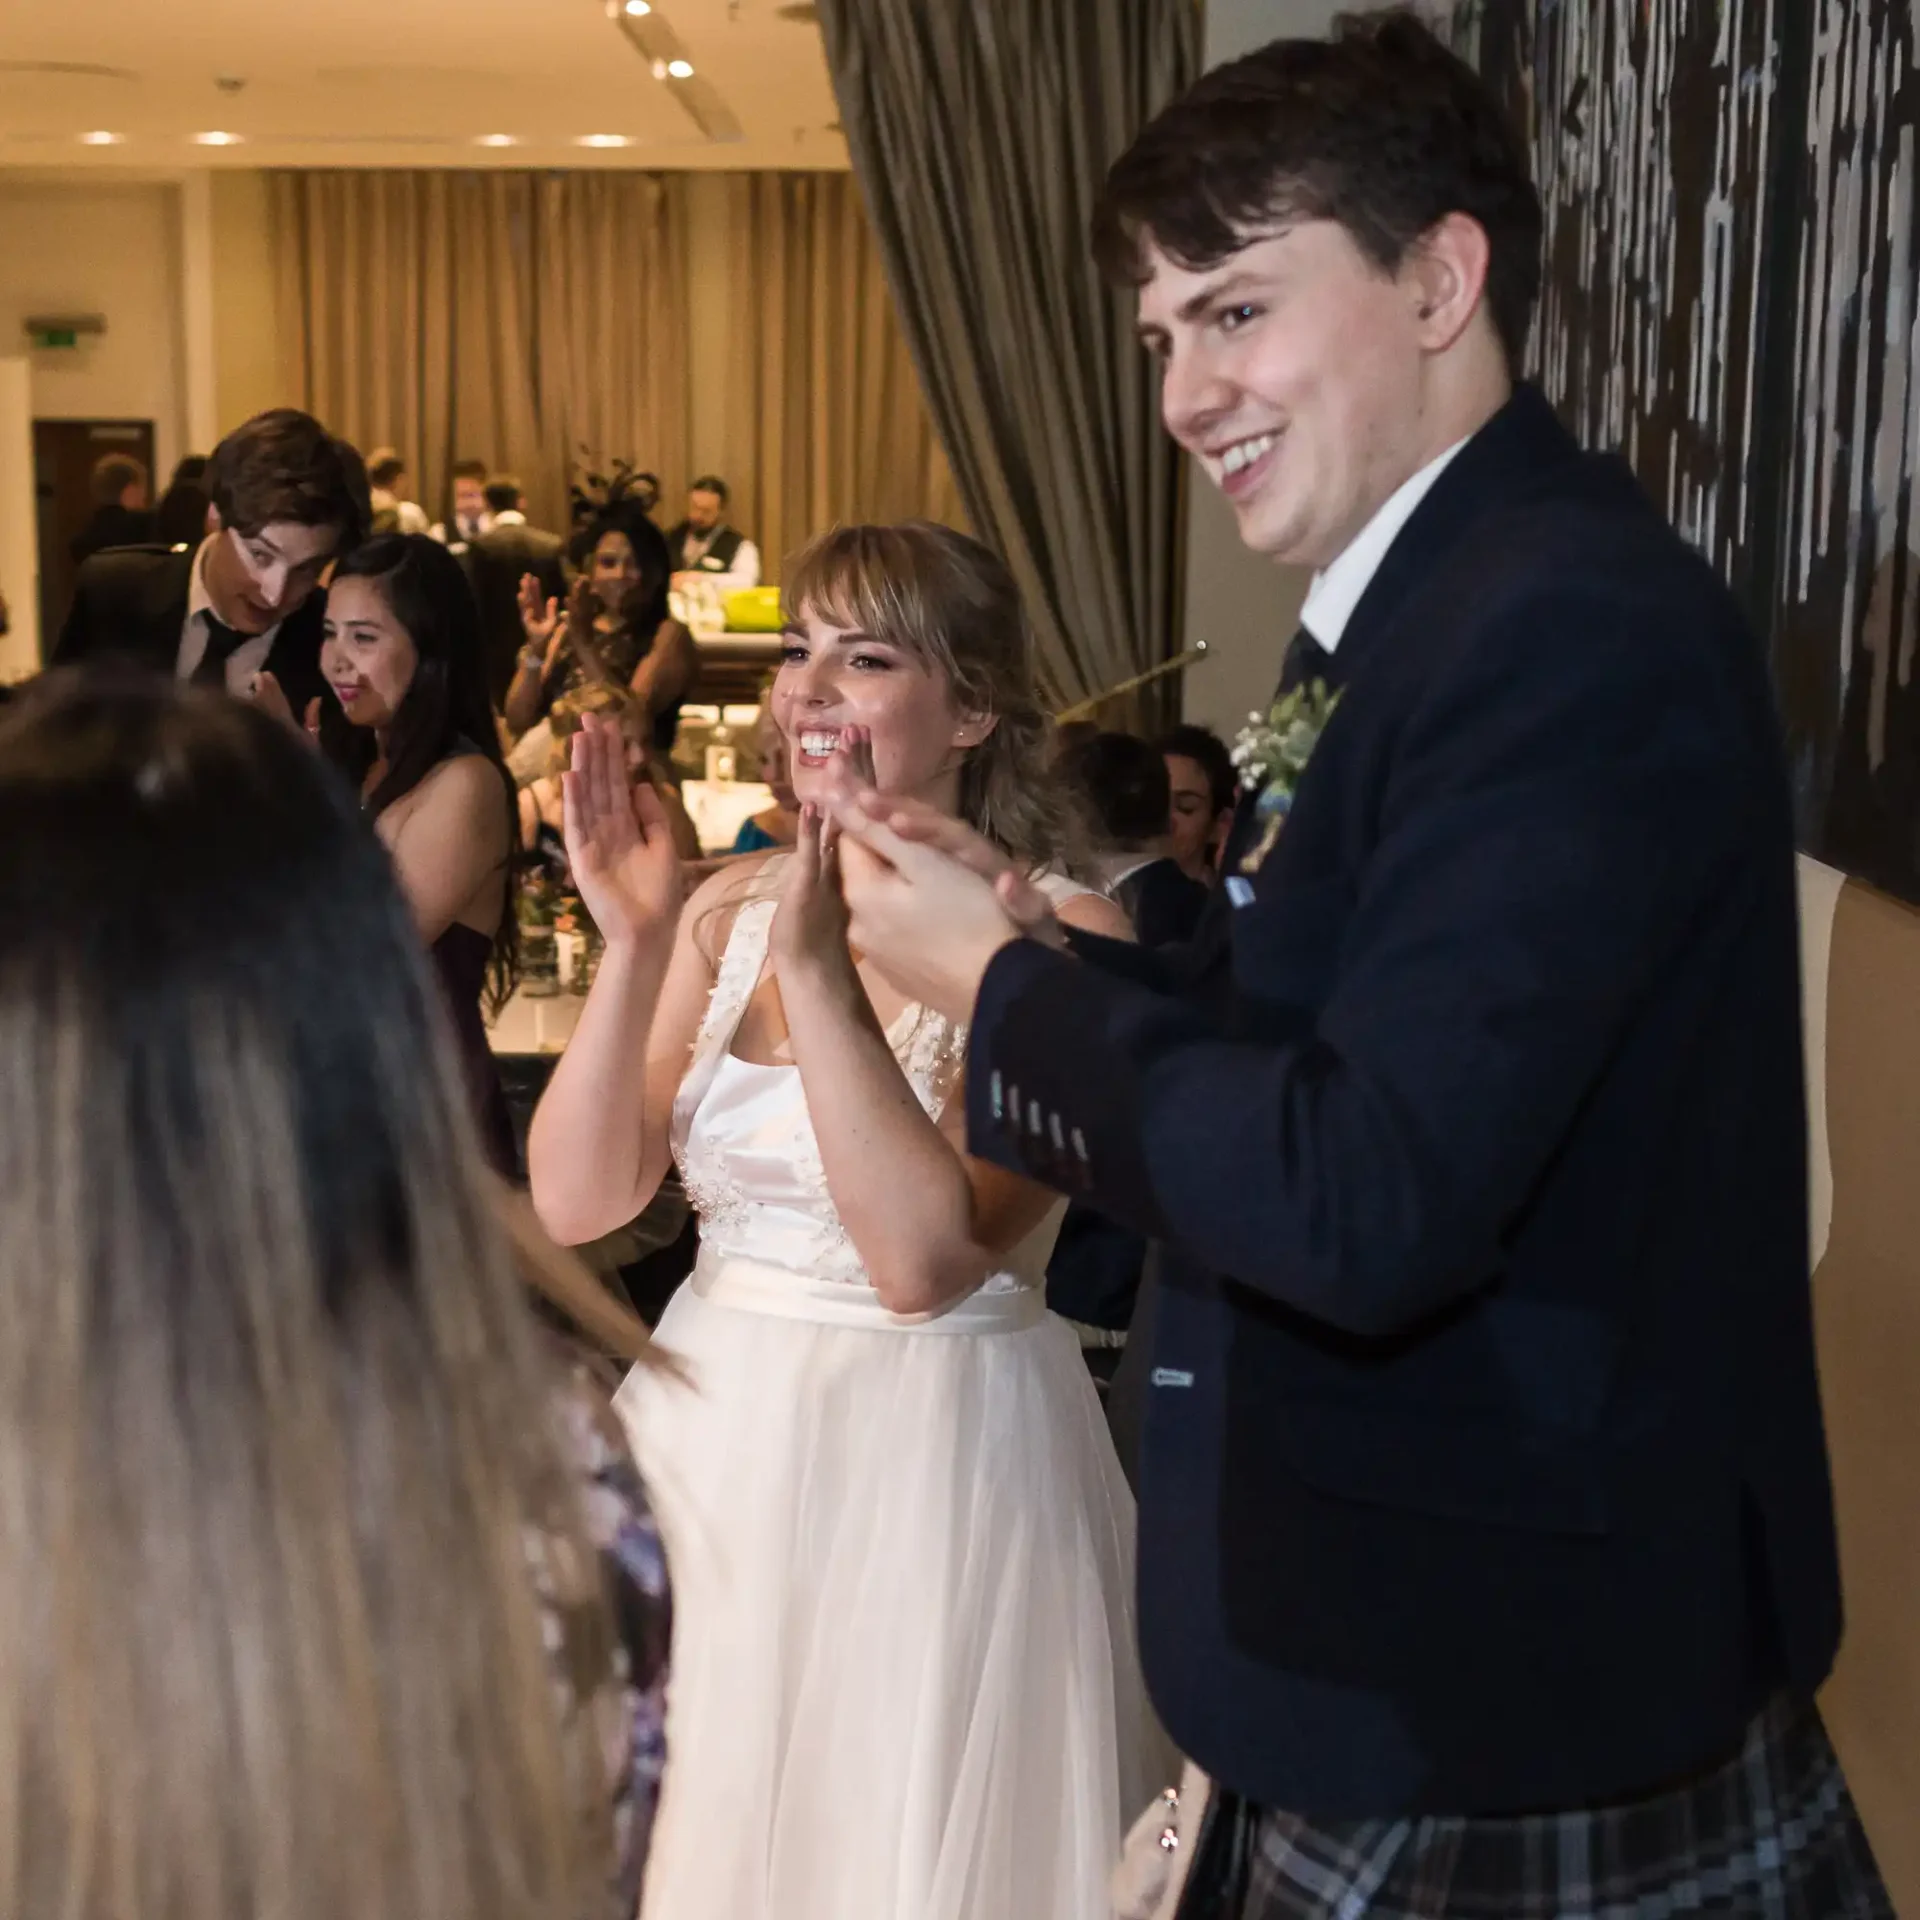 Bride in a white dress and groom in a kilt clap joyfully at a wedding reception surrounded by guests.